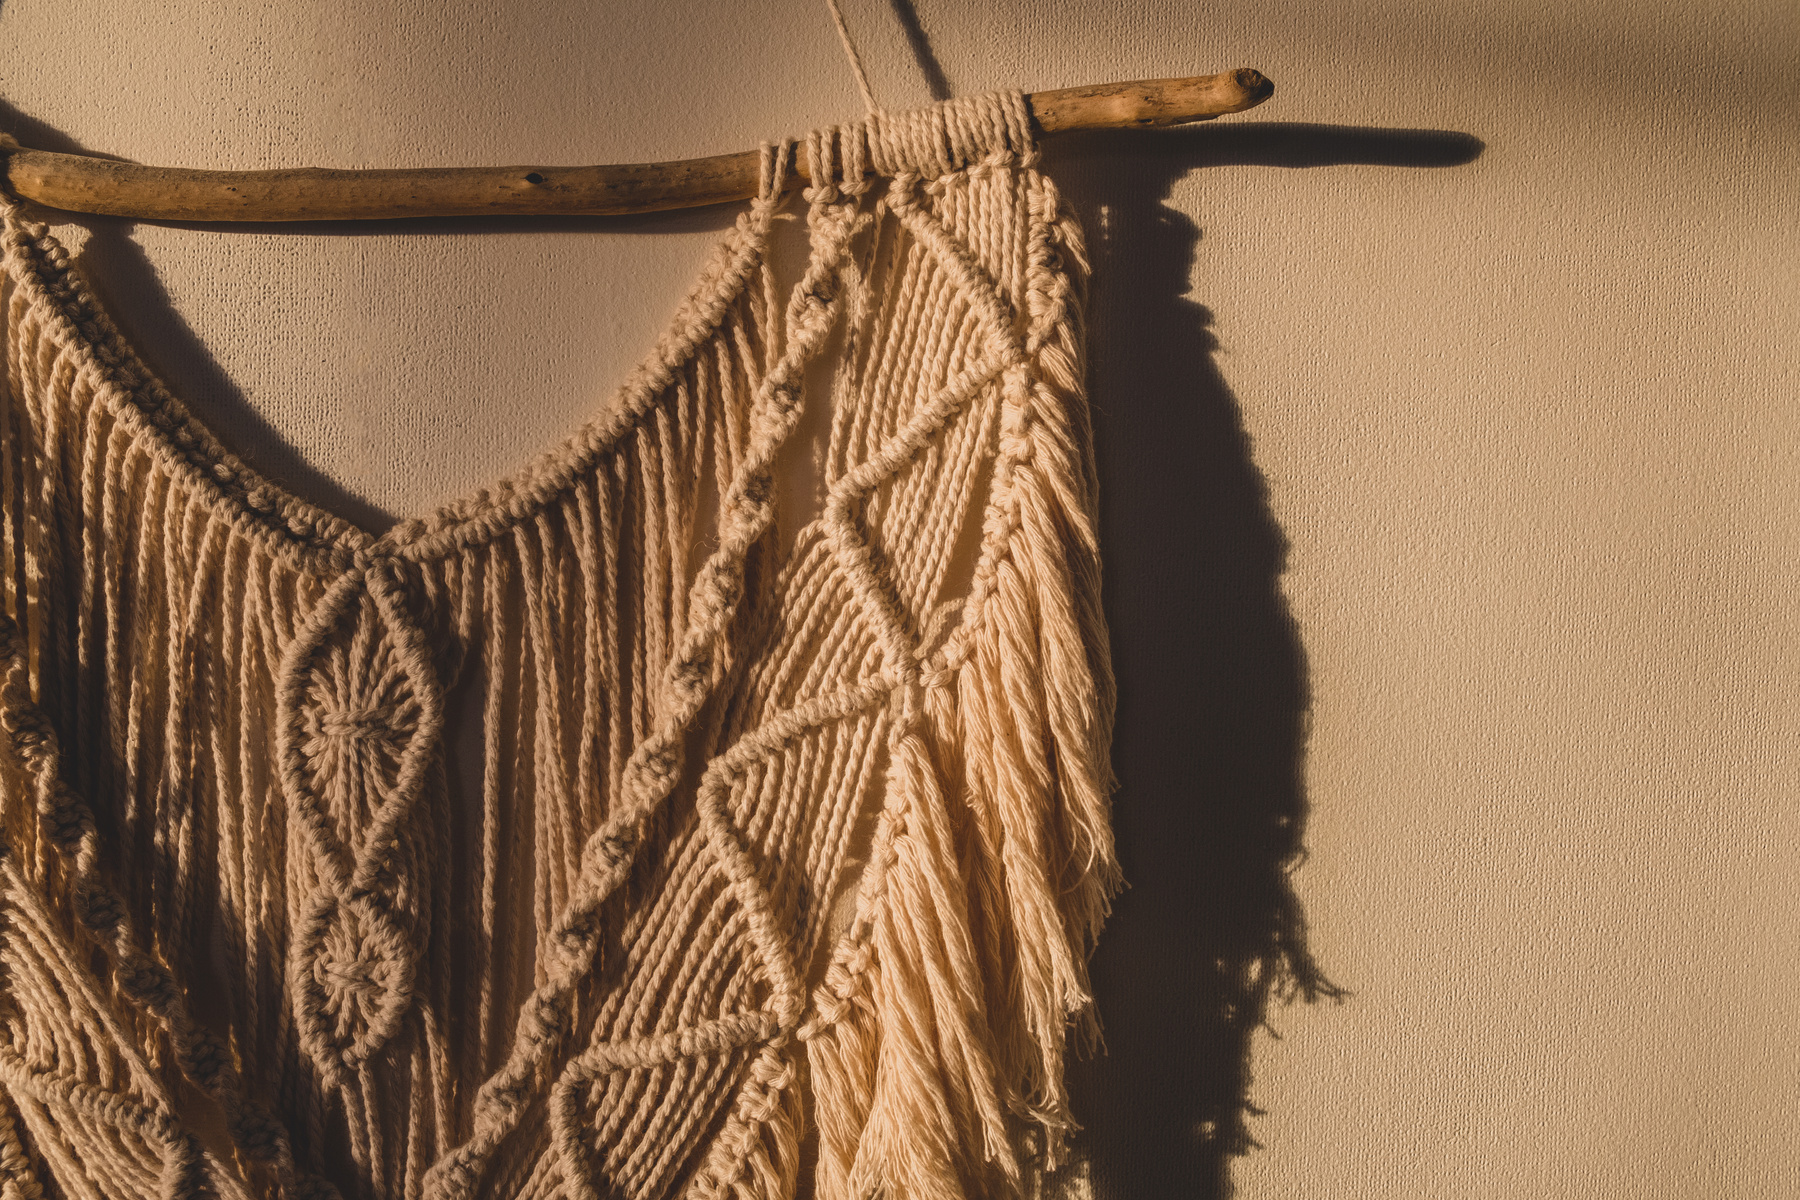 Detailed Shot of the Macrame Wall Hanging